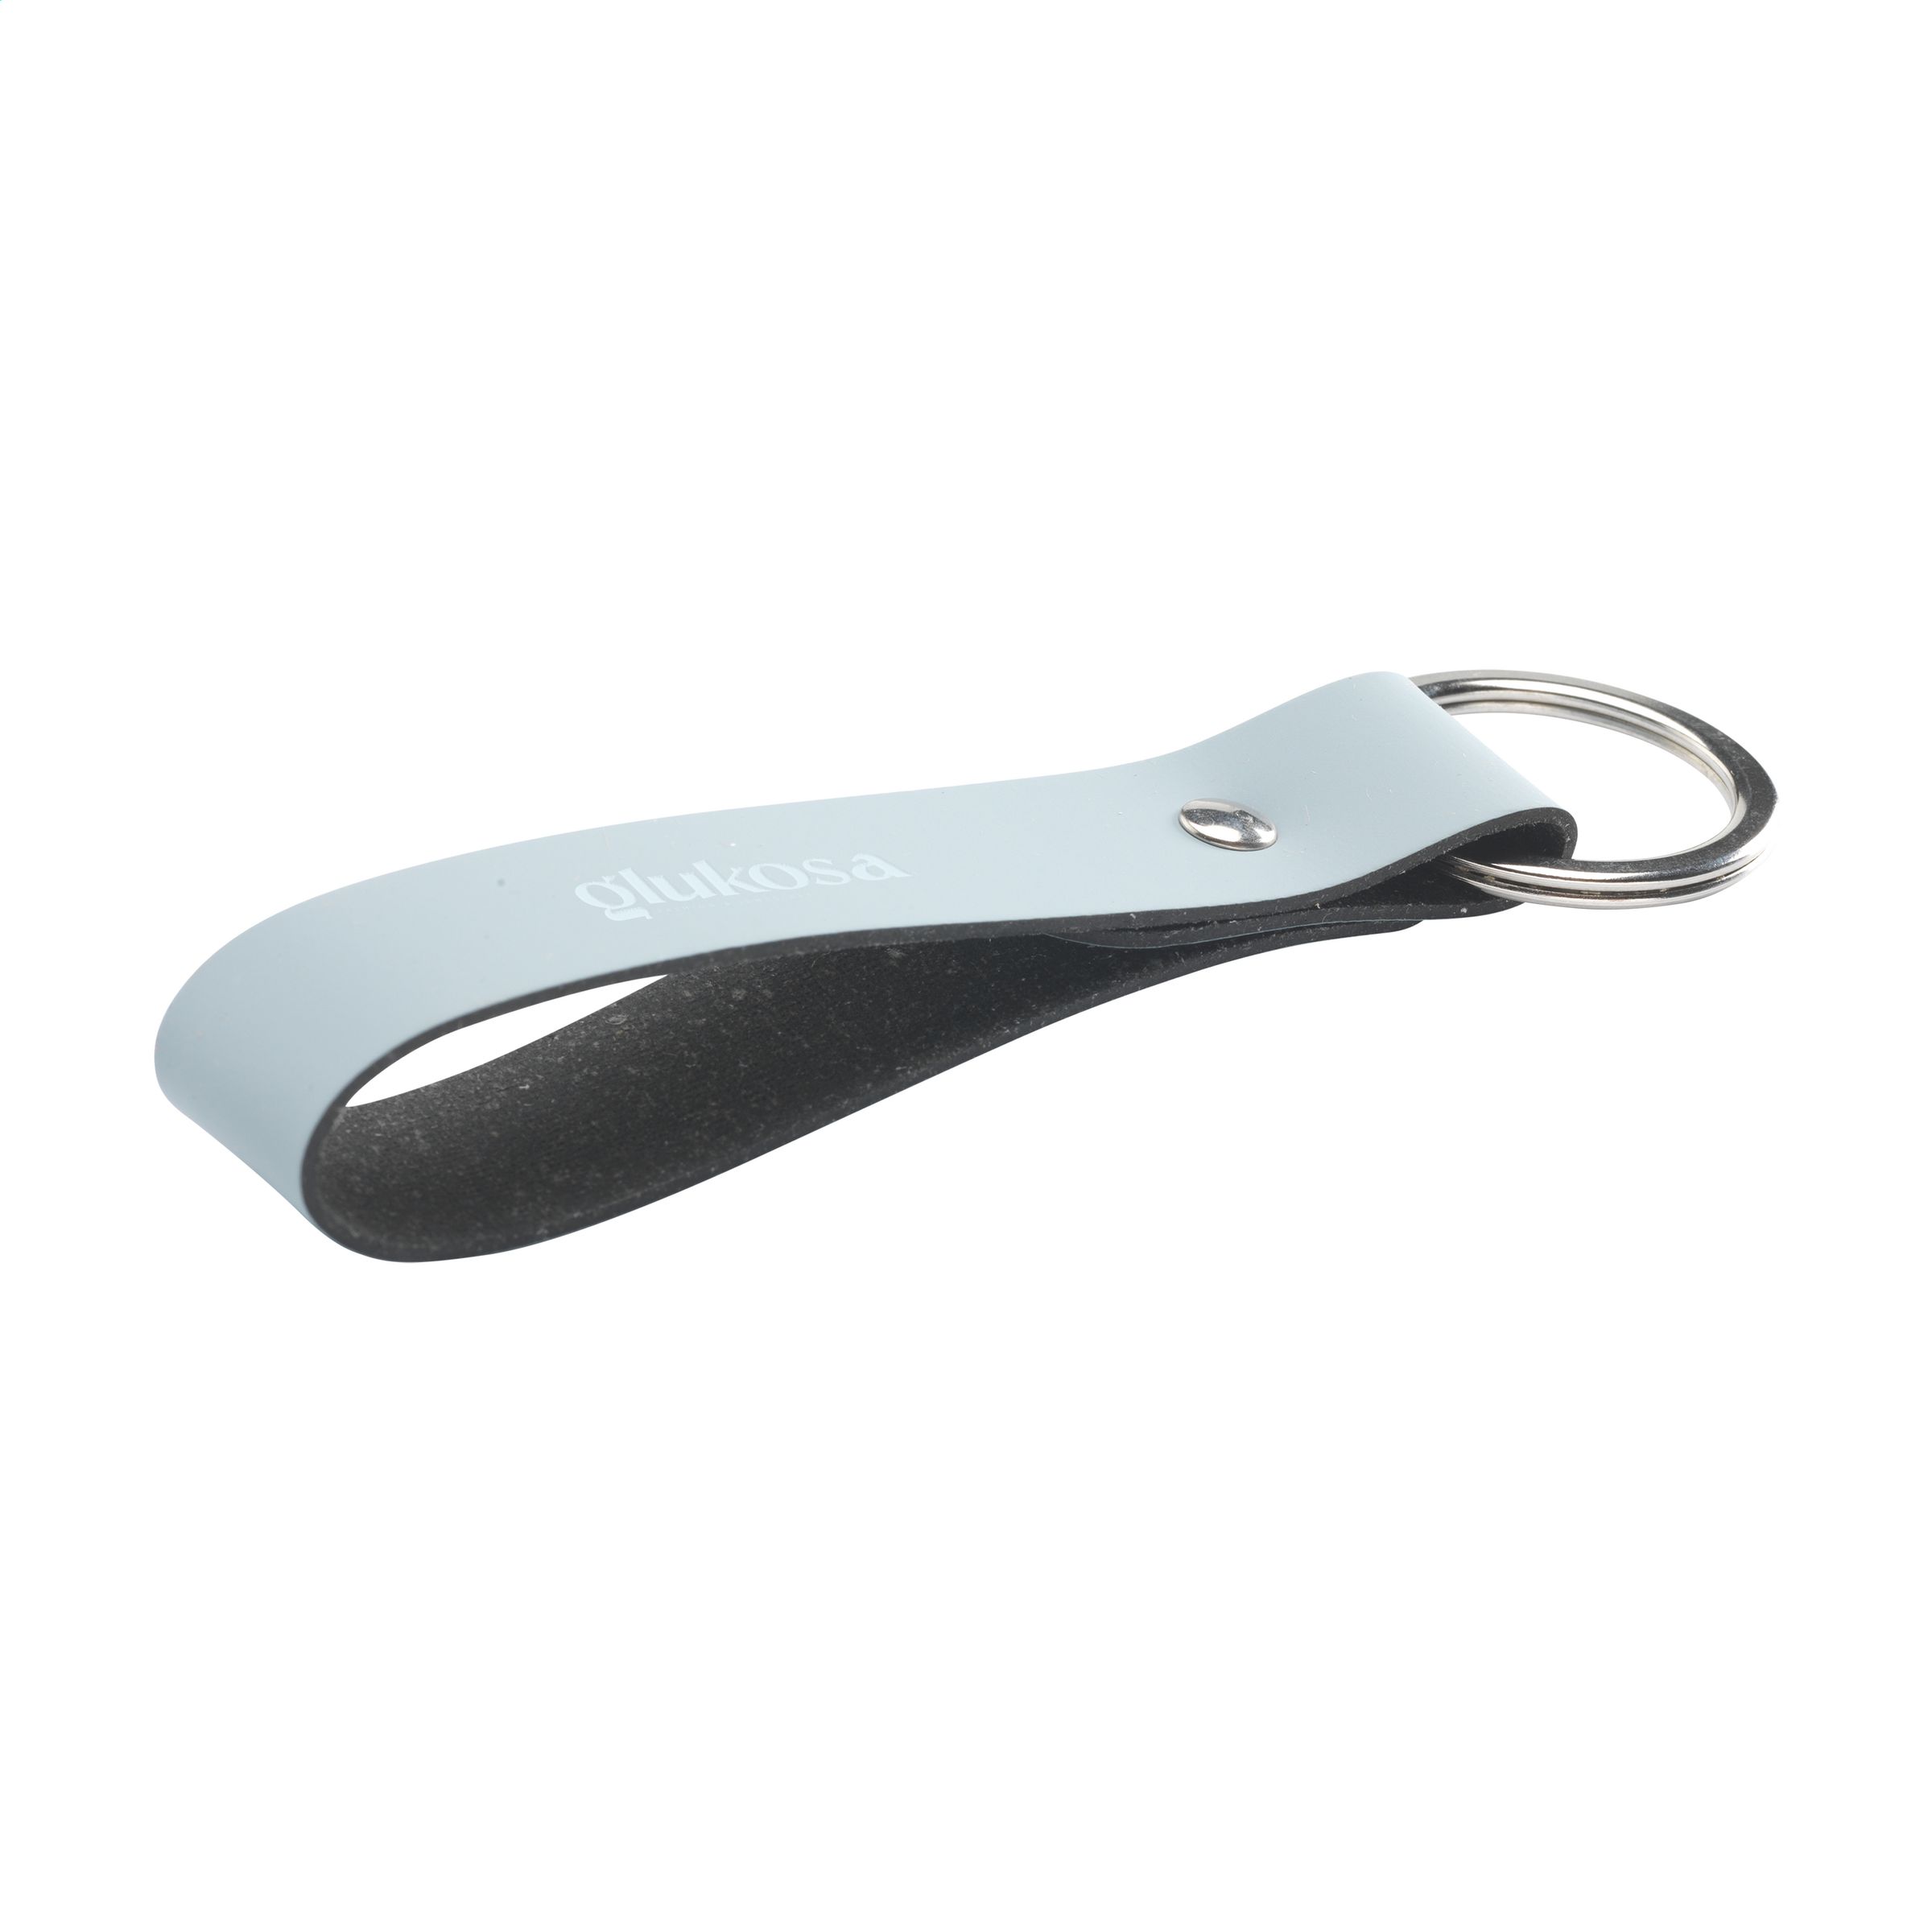 A Dingley keychain, ecologically designed and made from recycled leather. - Alne